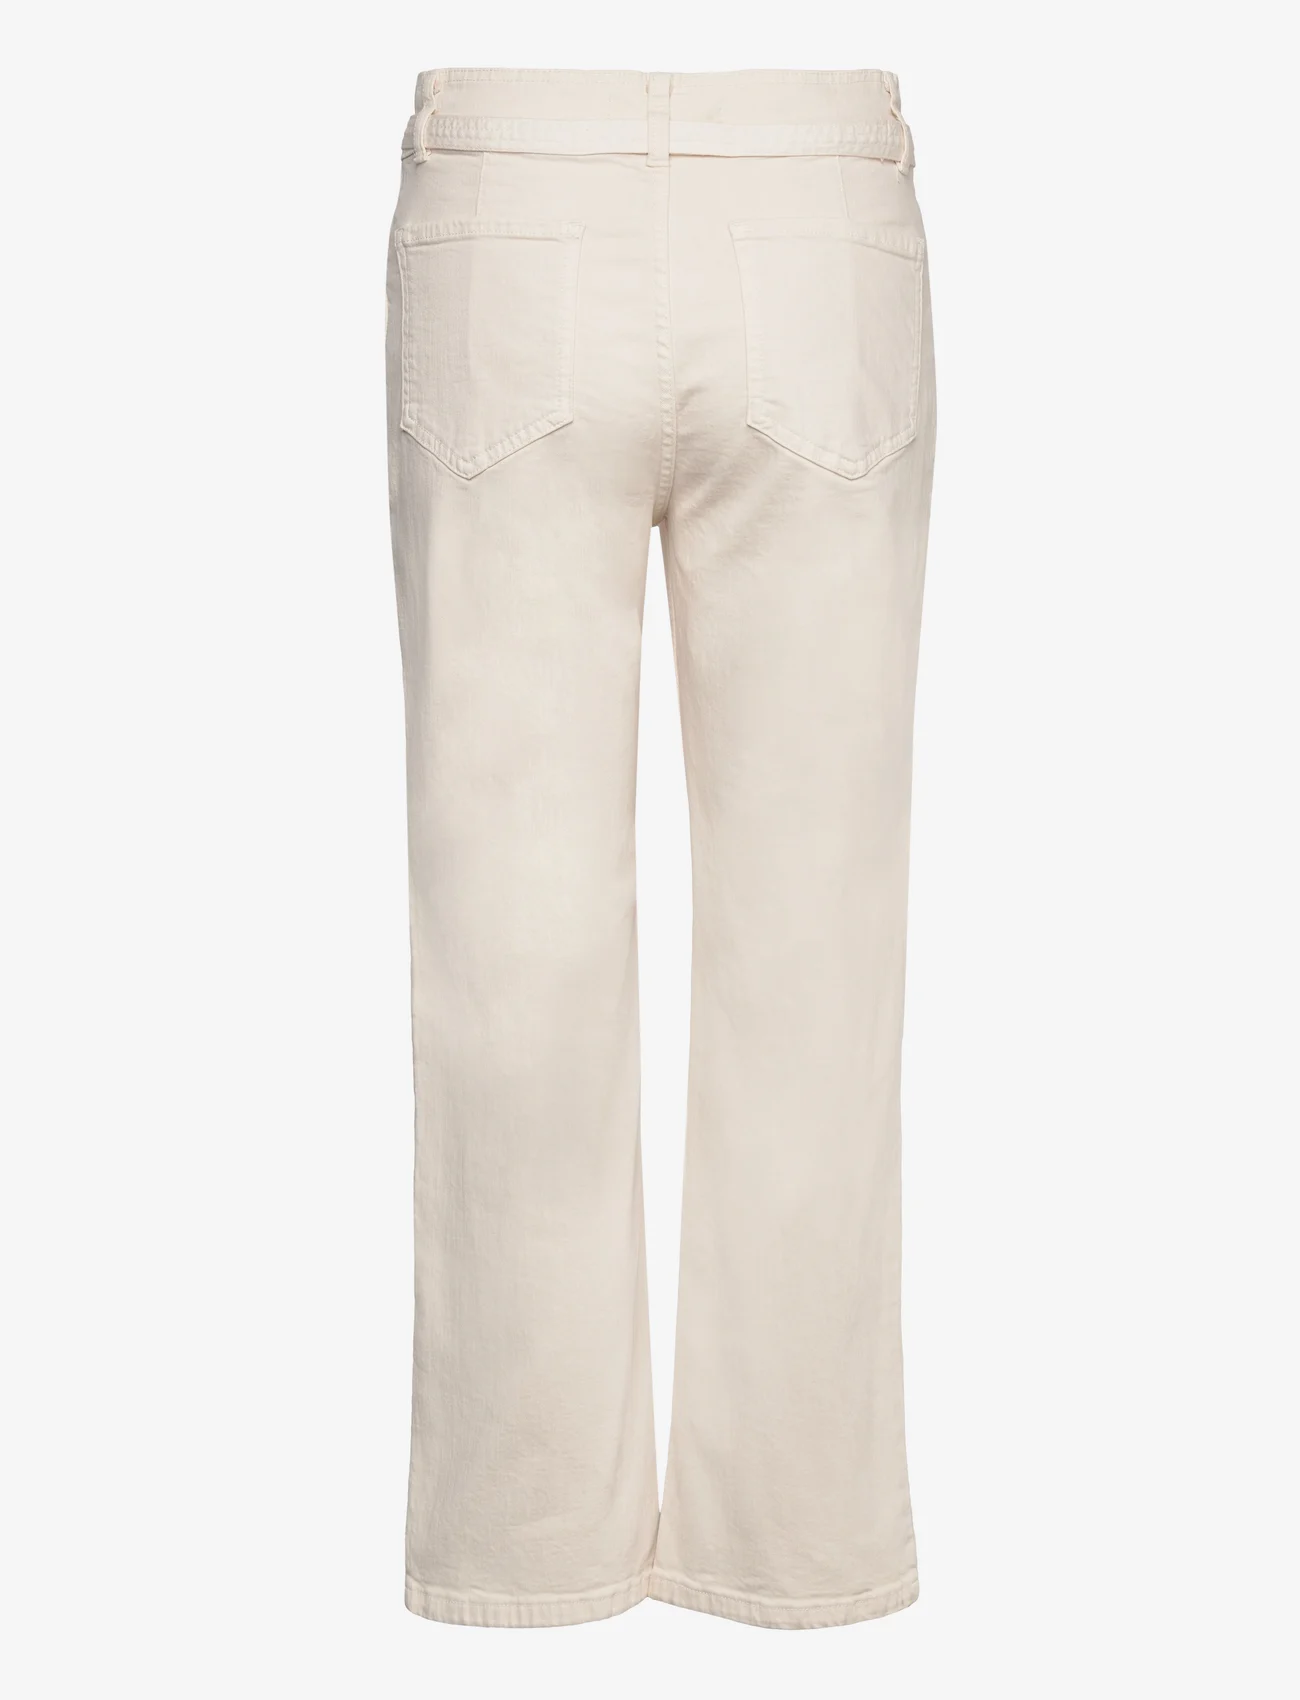 Mango - Straight-leg jeans with bow detail - bootcut jeans - light beige - 1